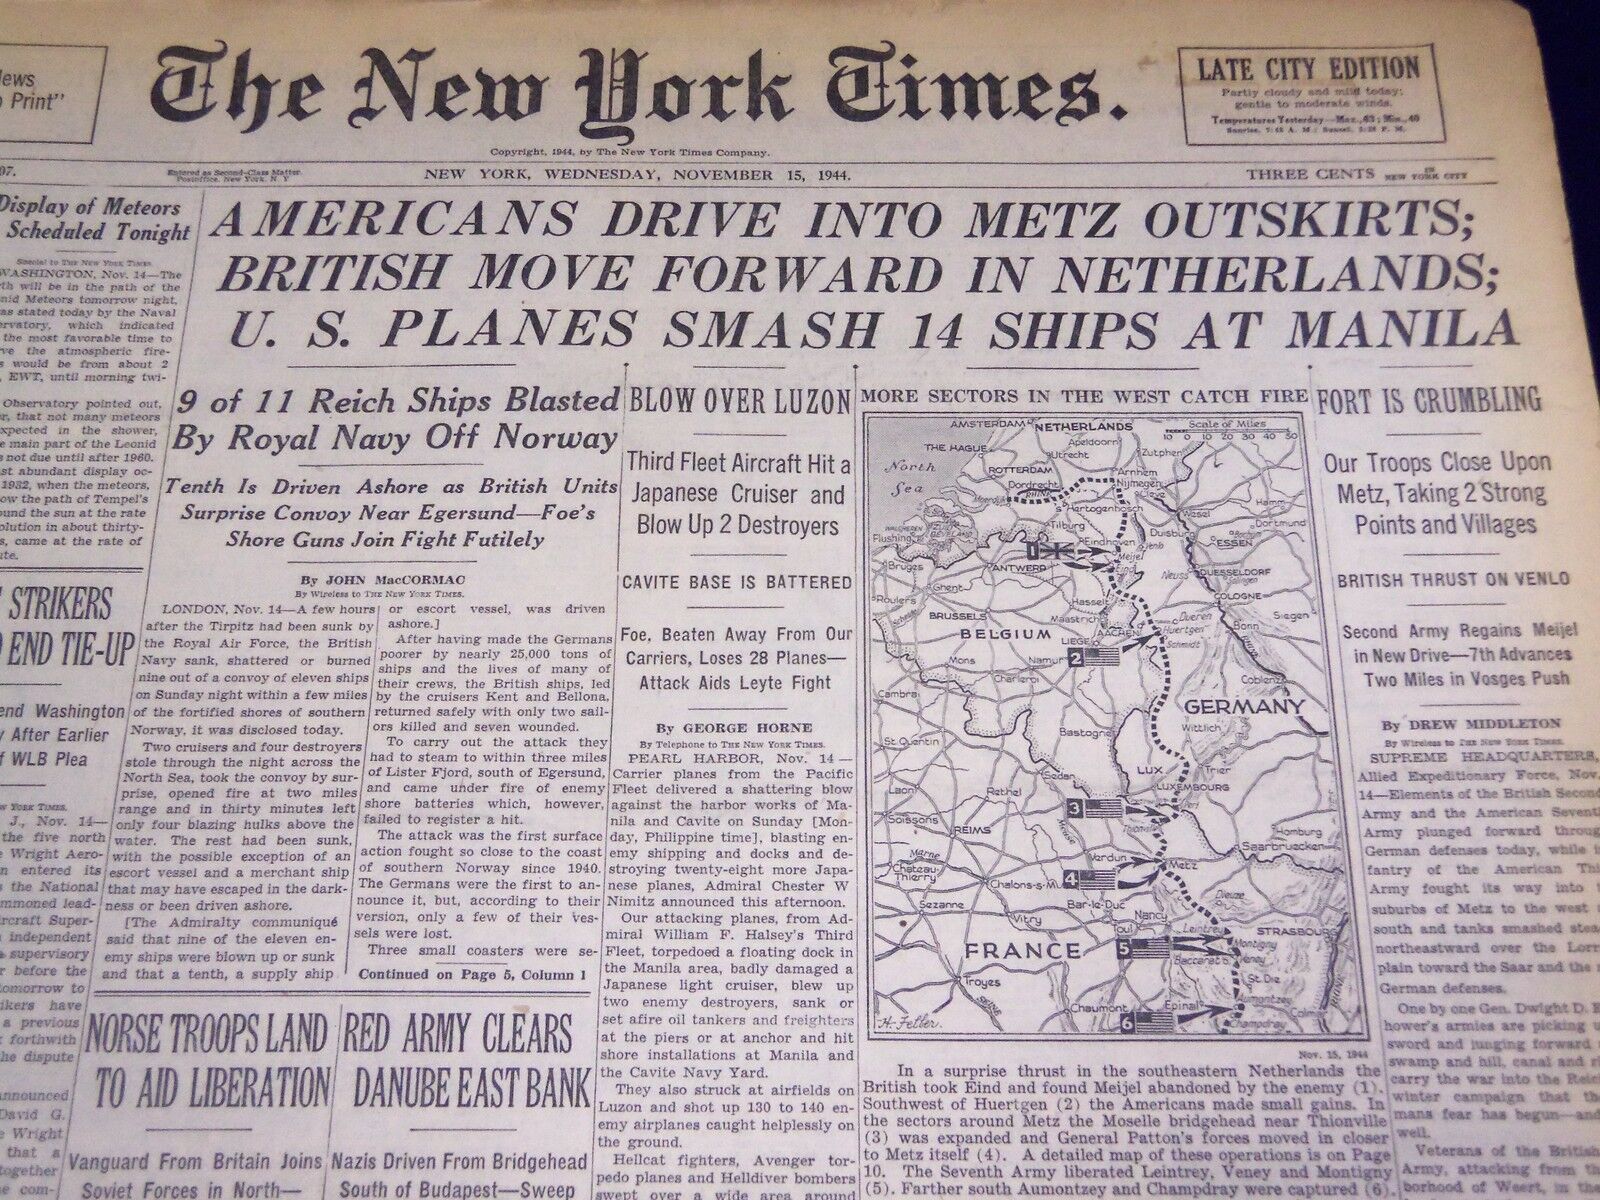 1944 NOV 15 NEW YORK TIMES - AMERICANS DRIVE INTO METZ OUTSKIRTS - NT 825